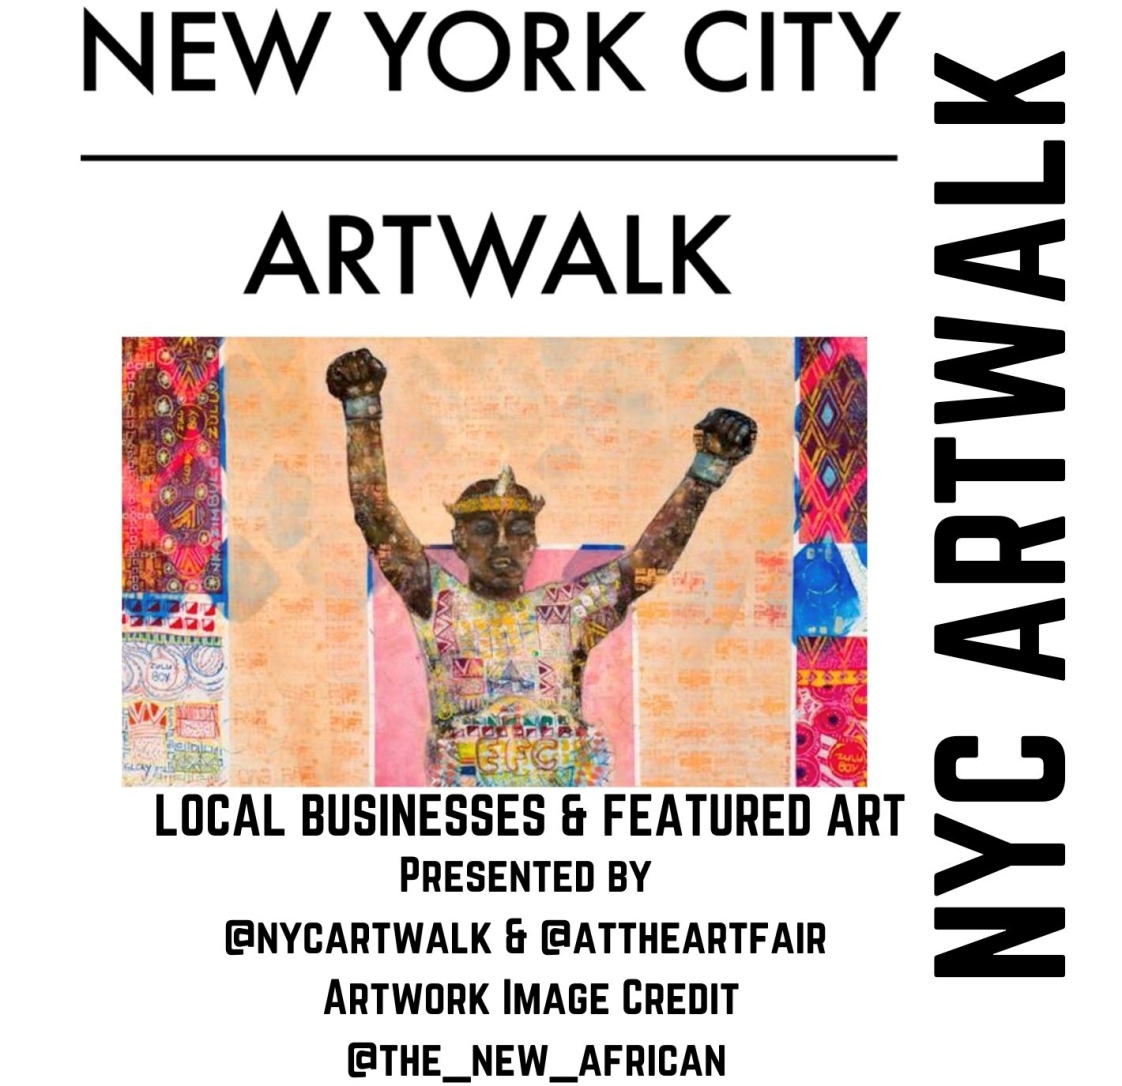 NYC ARTWALK to Bring Art and Culture to the Streets of New York